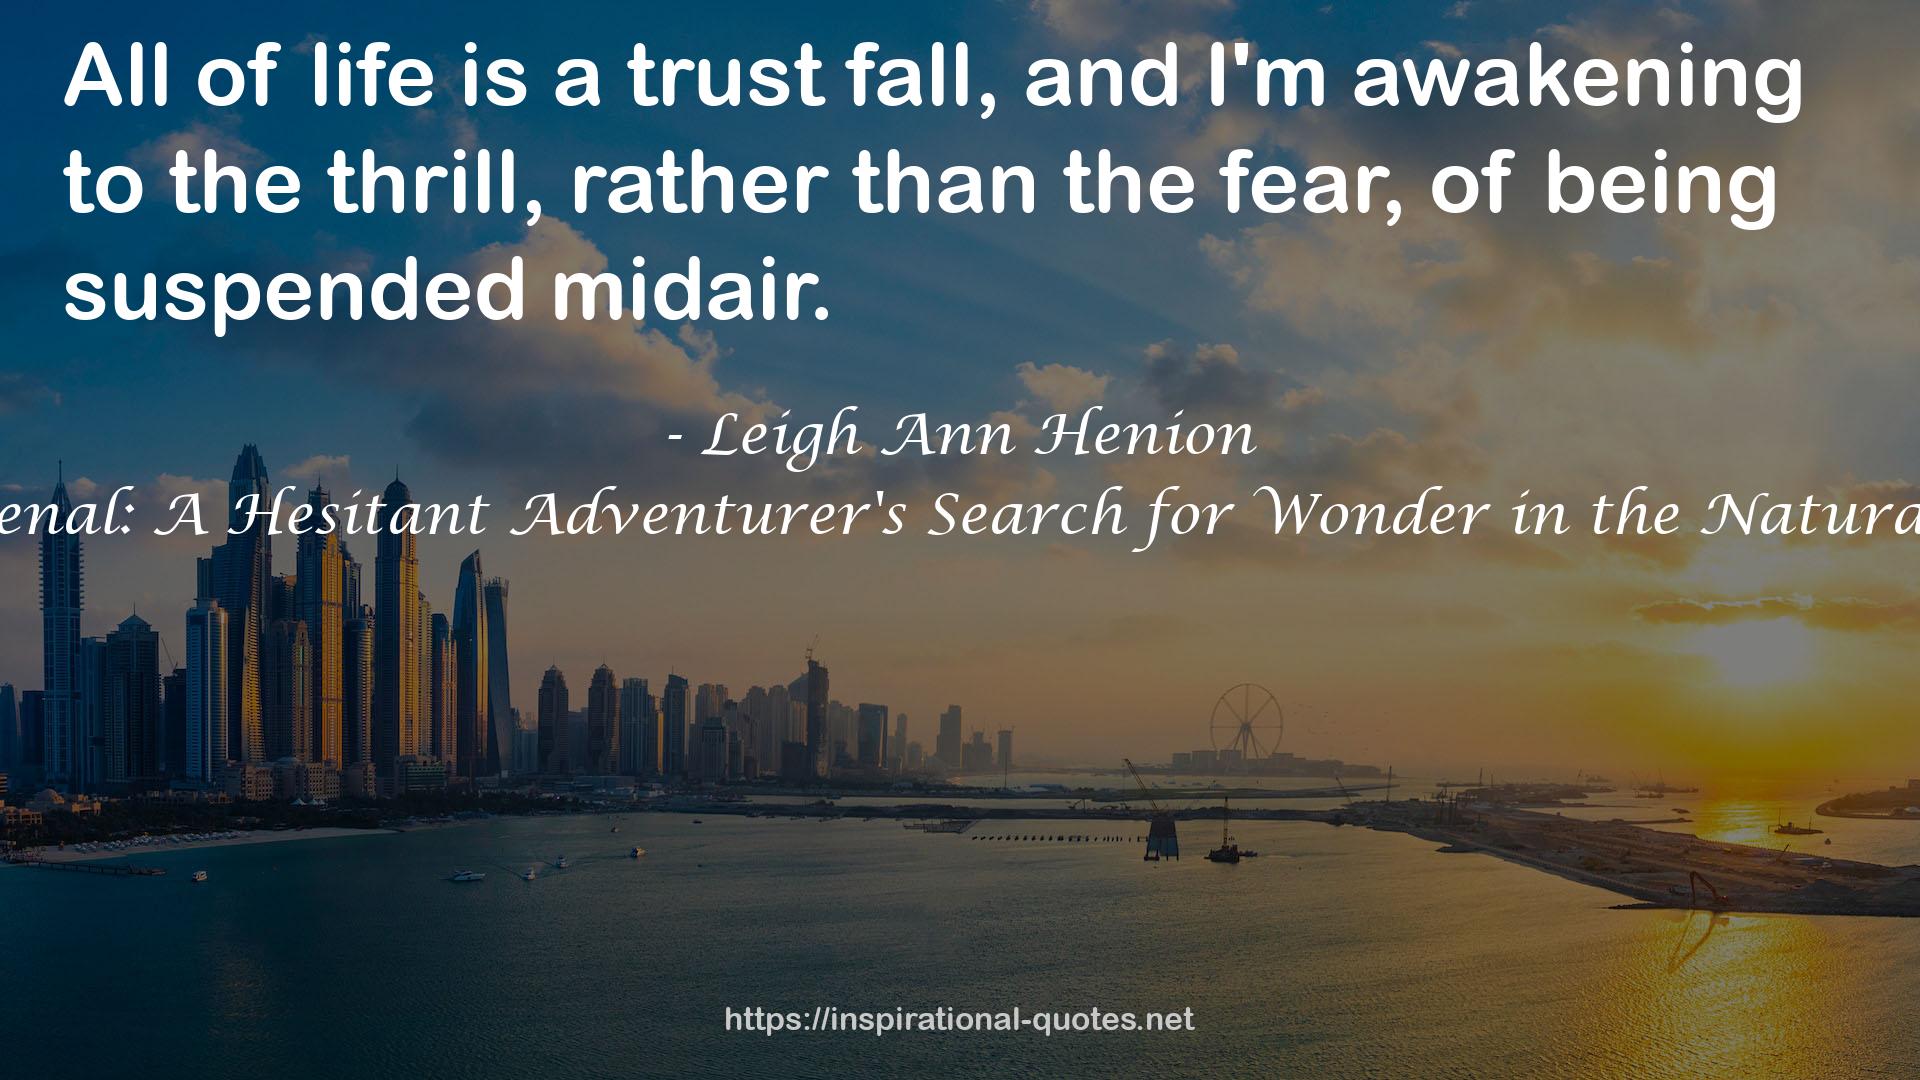 Phenomenal: A Hesitant Adventurer's Search for Wonder in the Natural World QUOTES